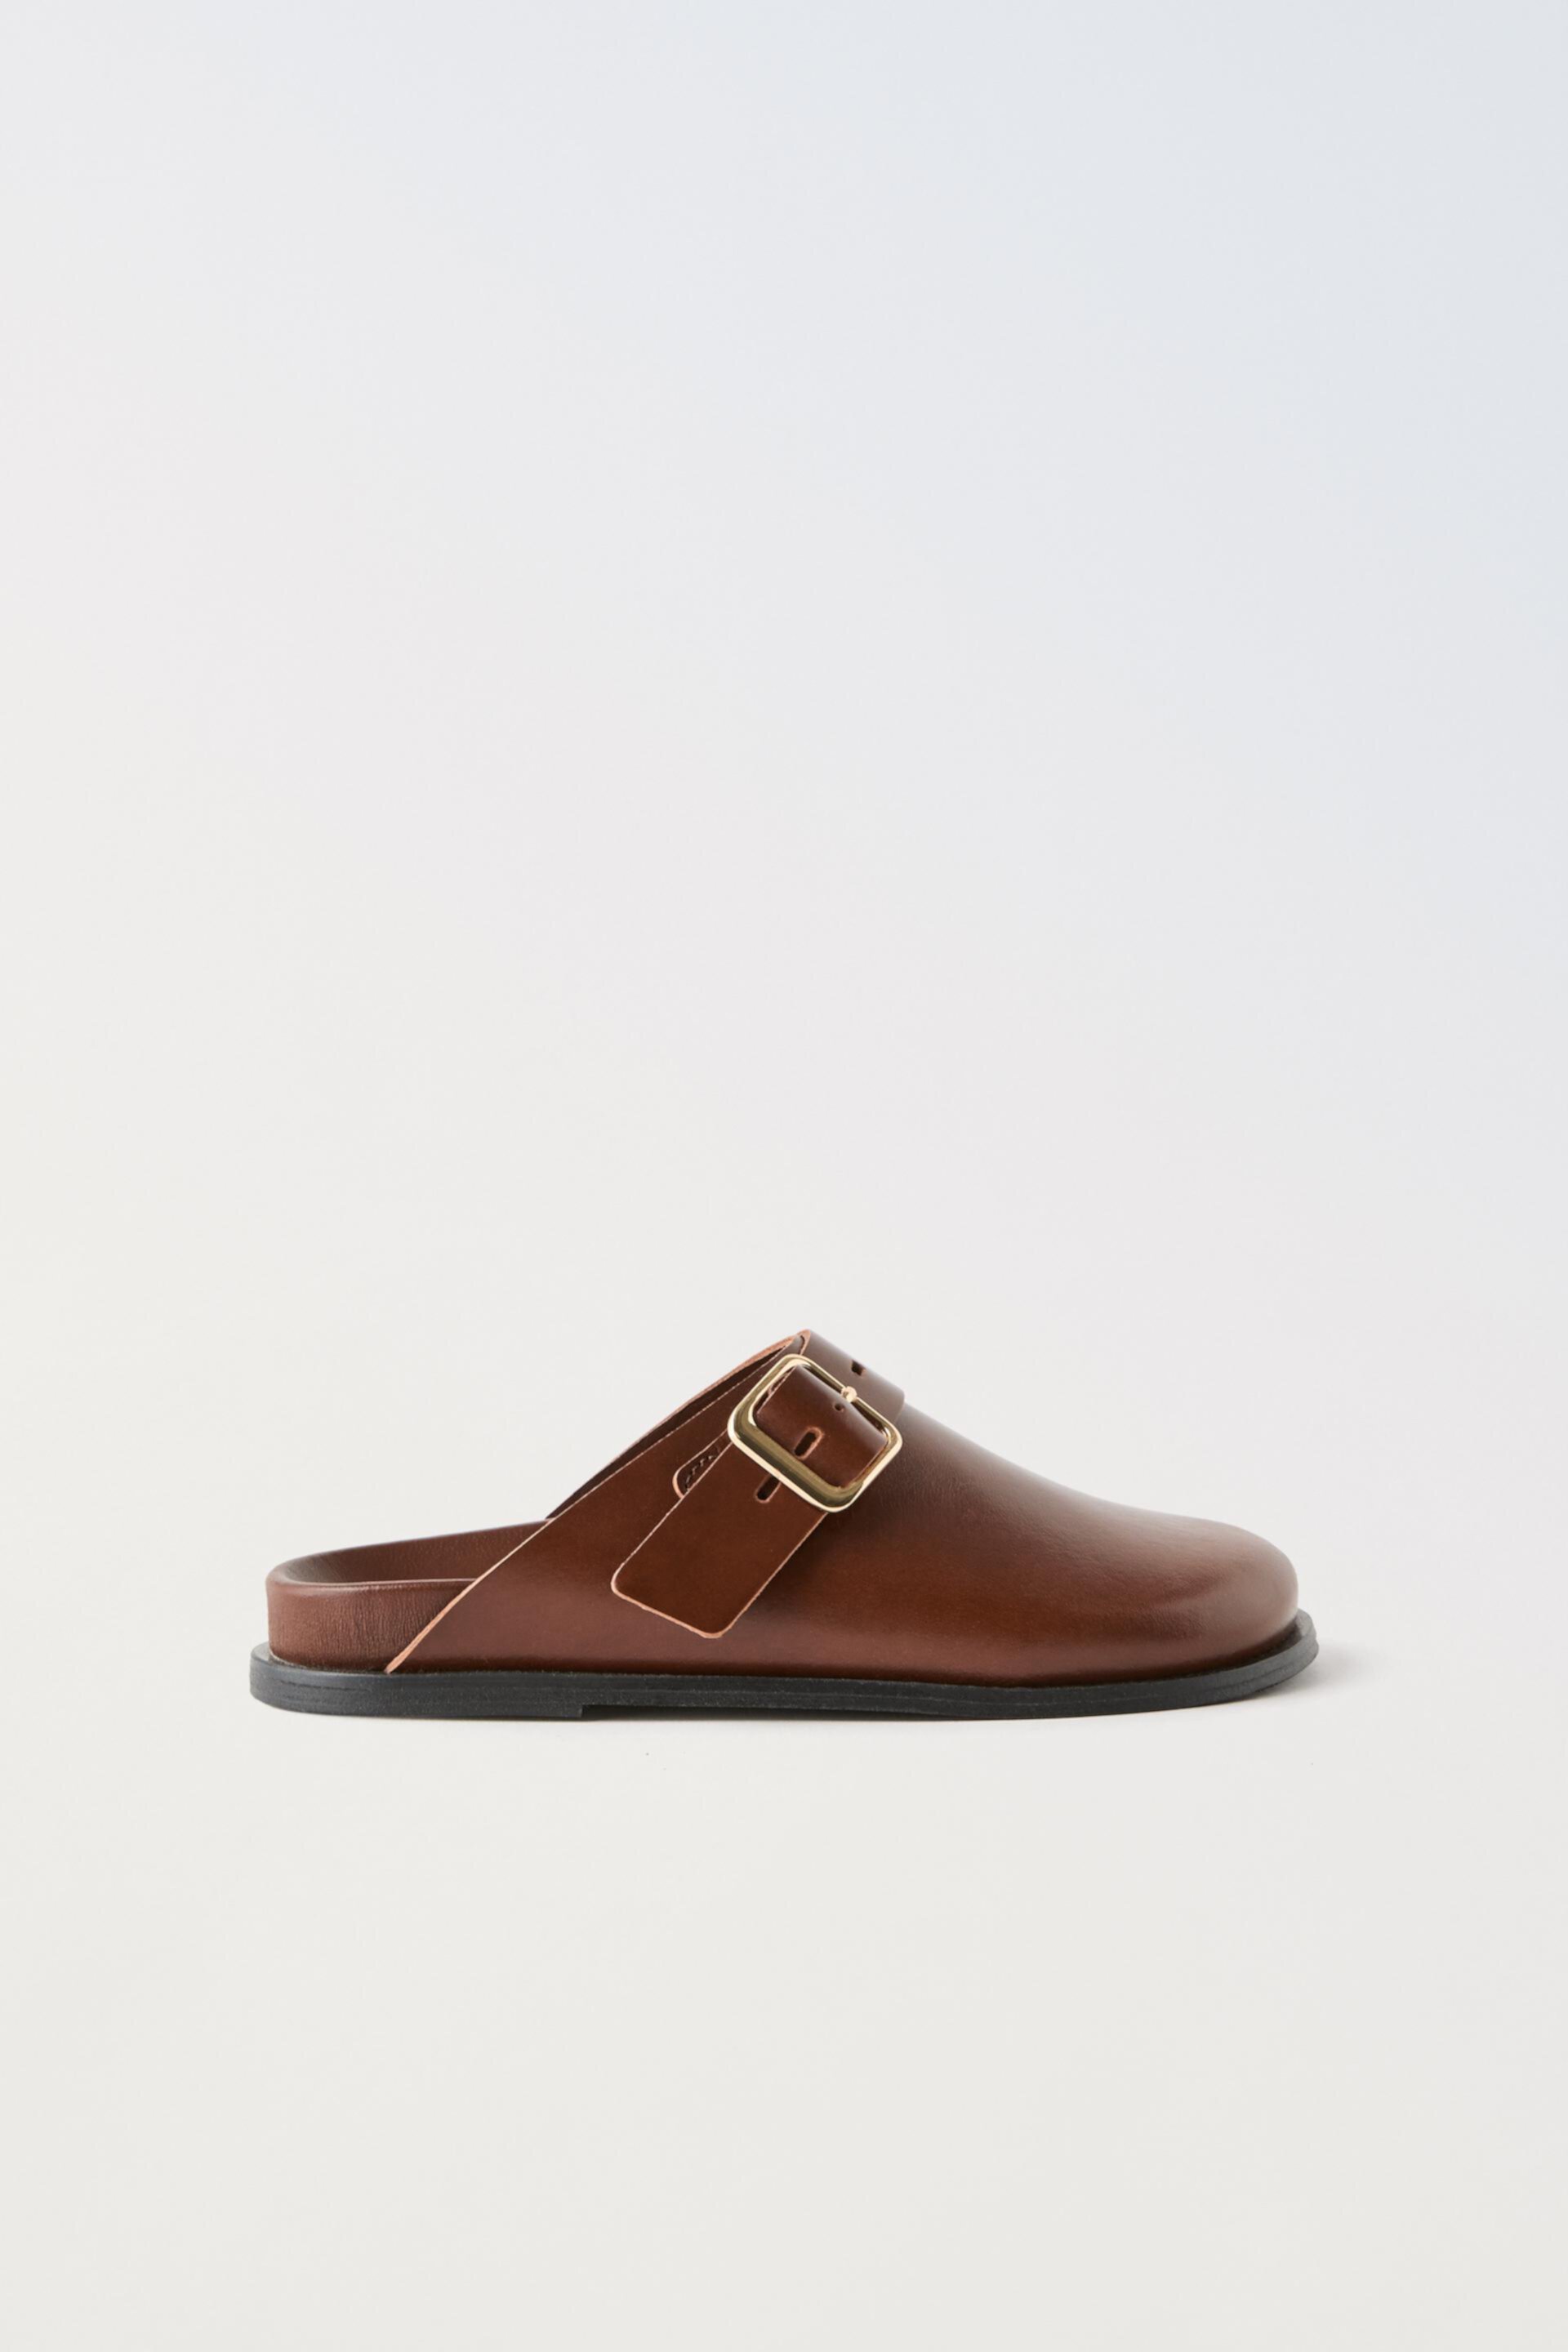 LEATHER CLOG WITH SIDE BUCKLE ZARA